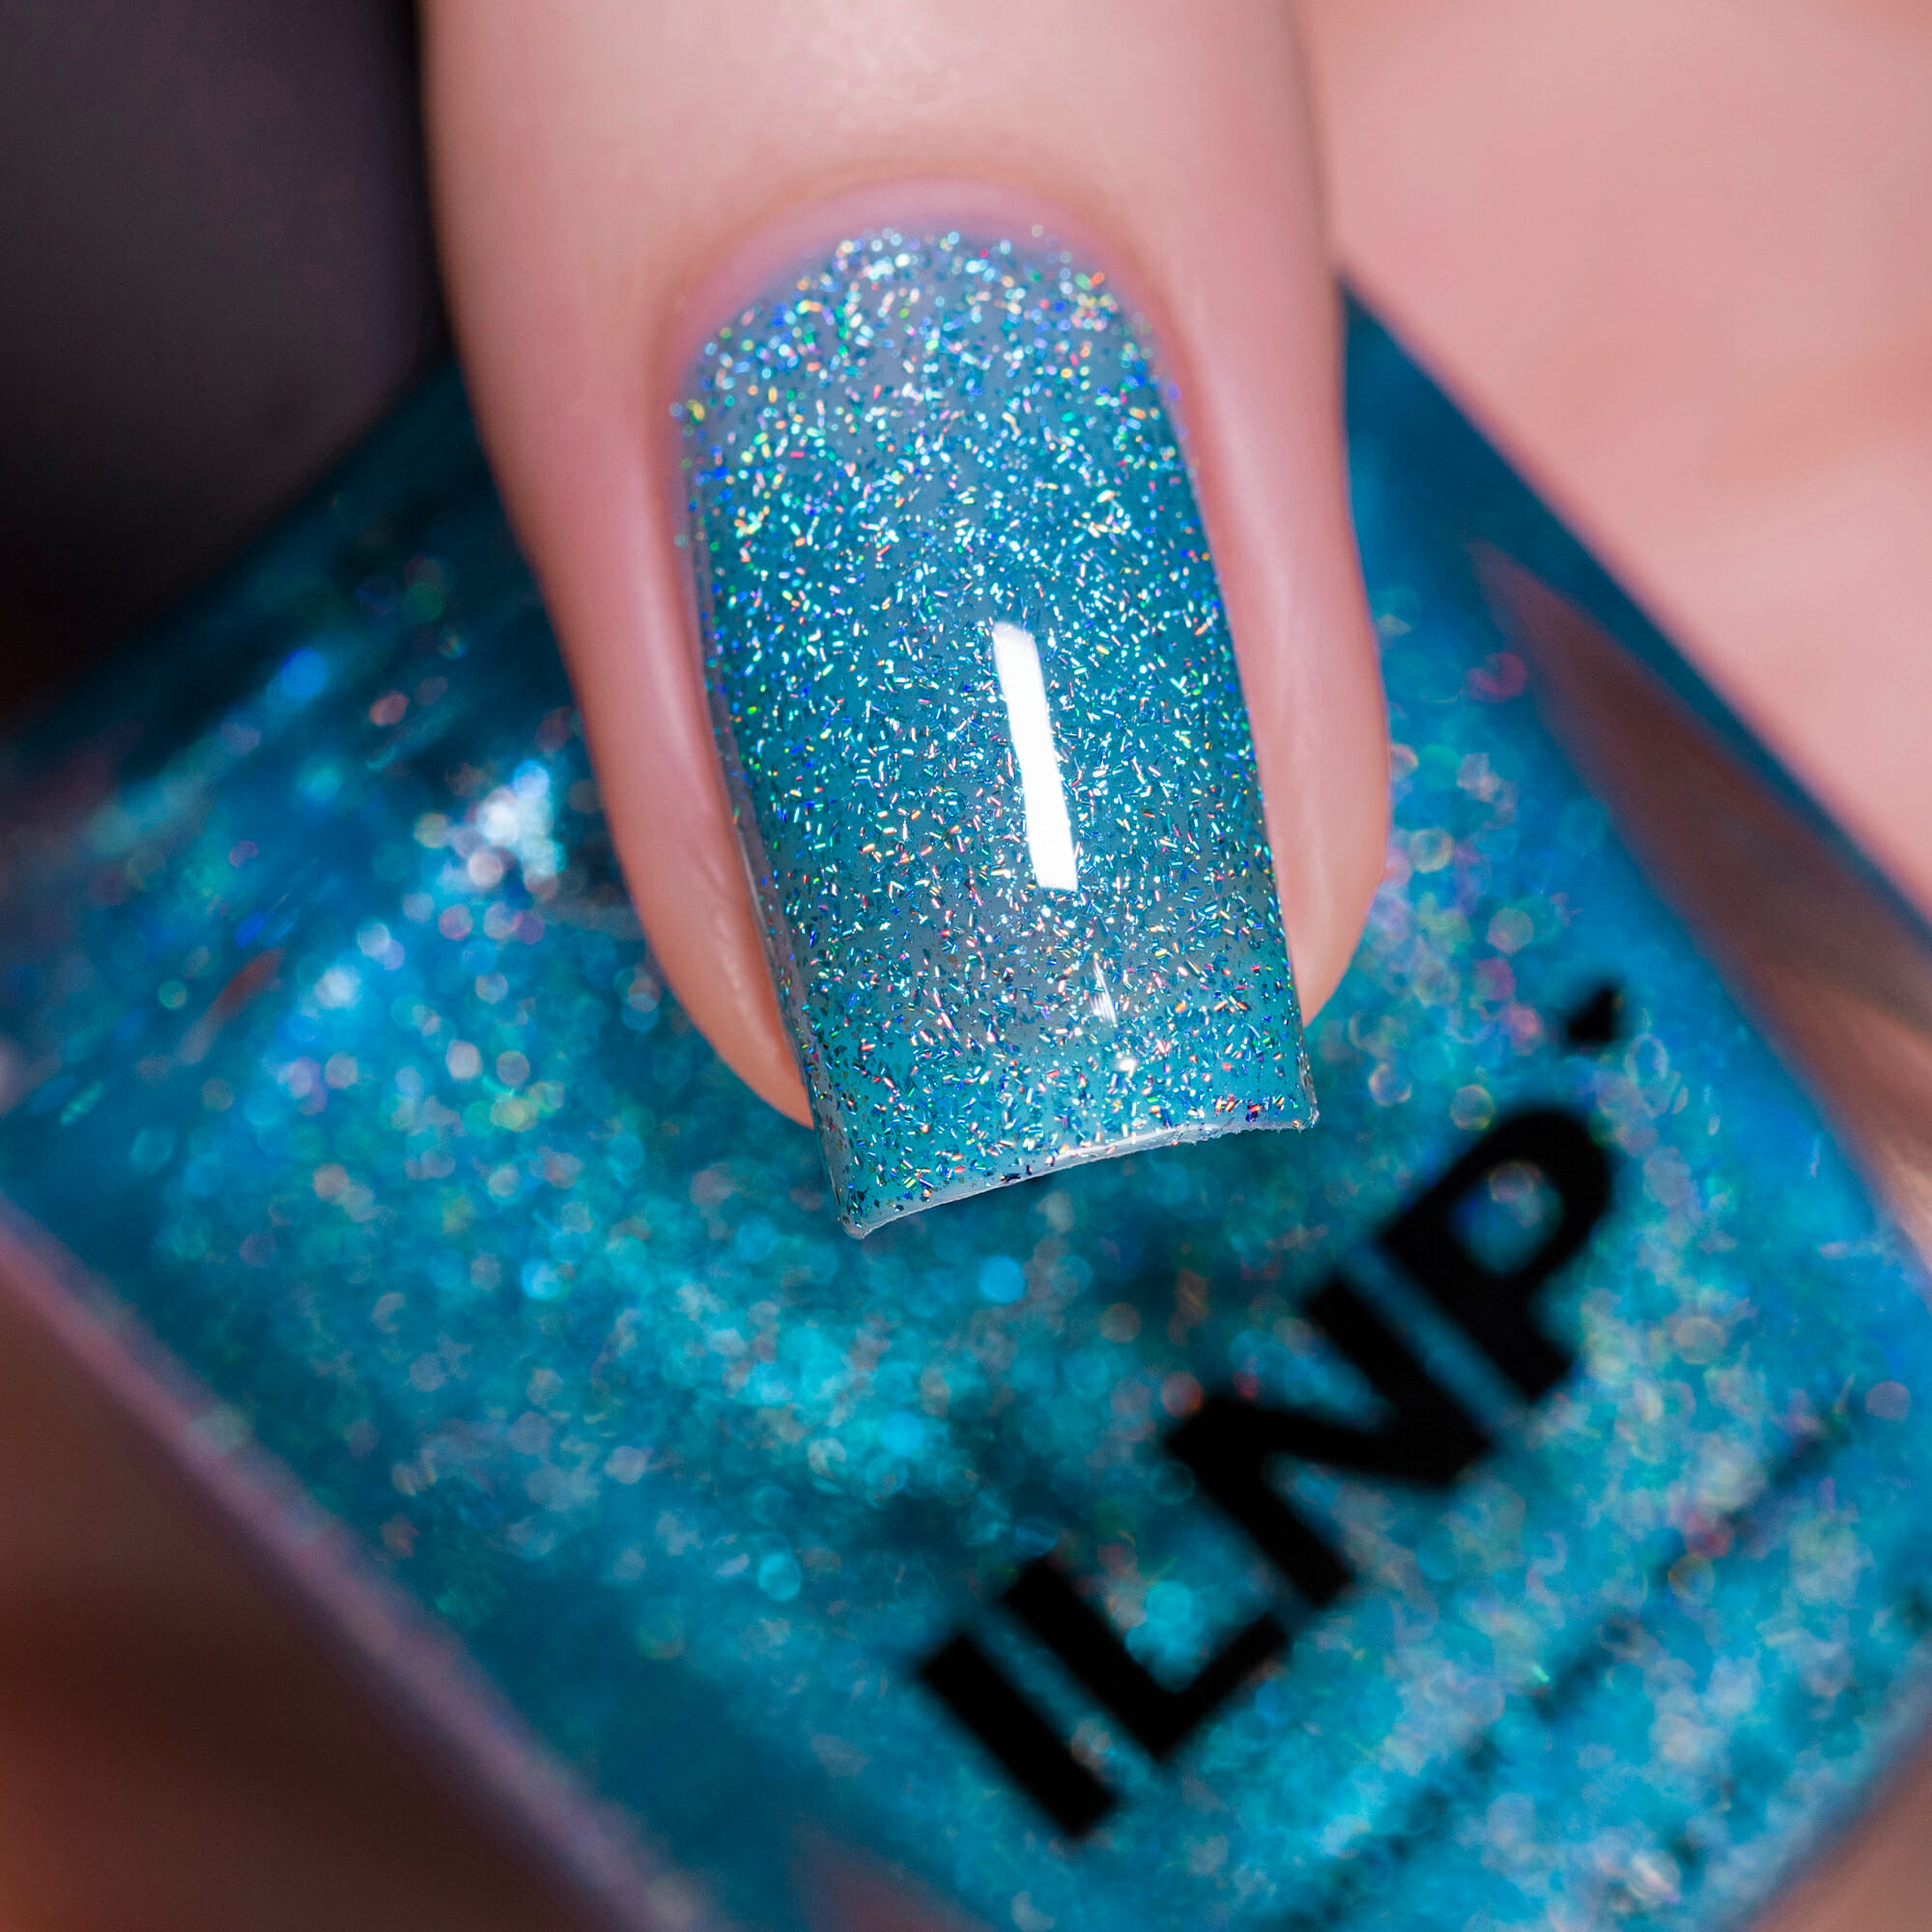 Seaside - Ocean Blue Holographic Jelly Nail Polish by ILNP